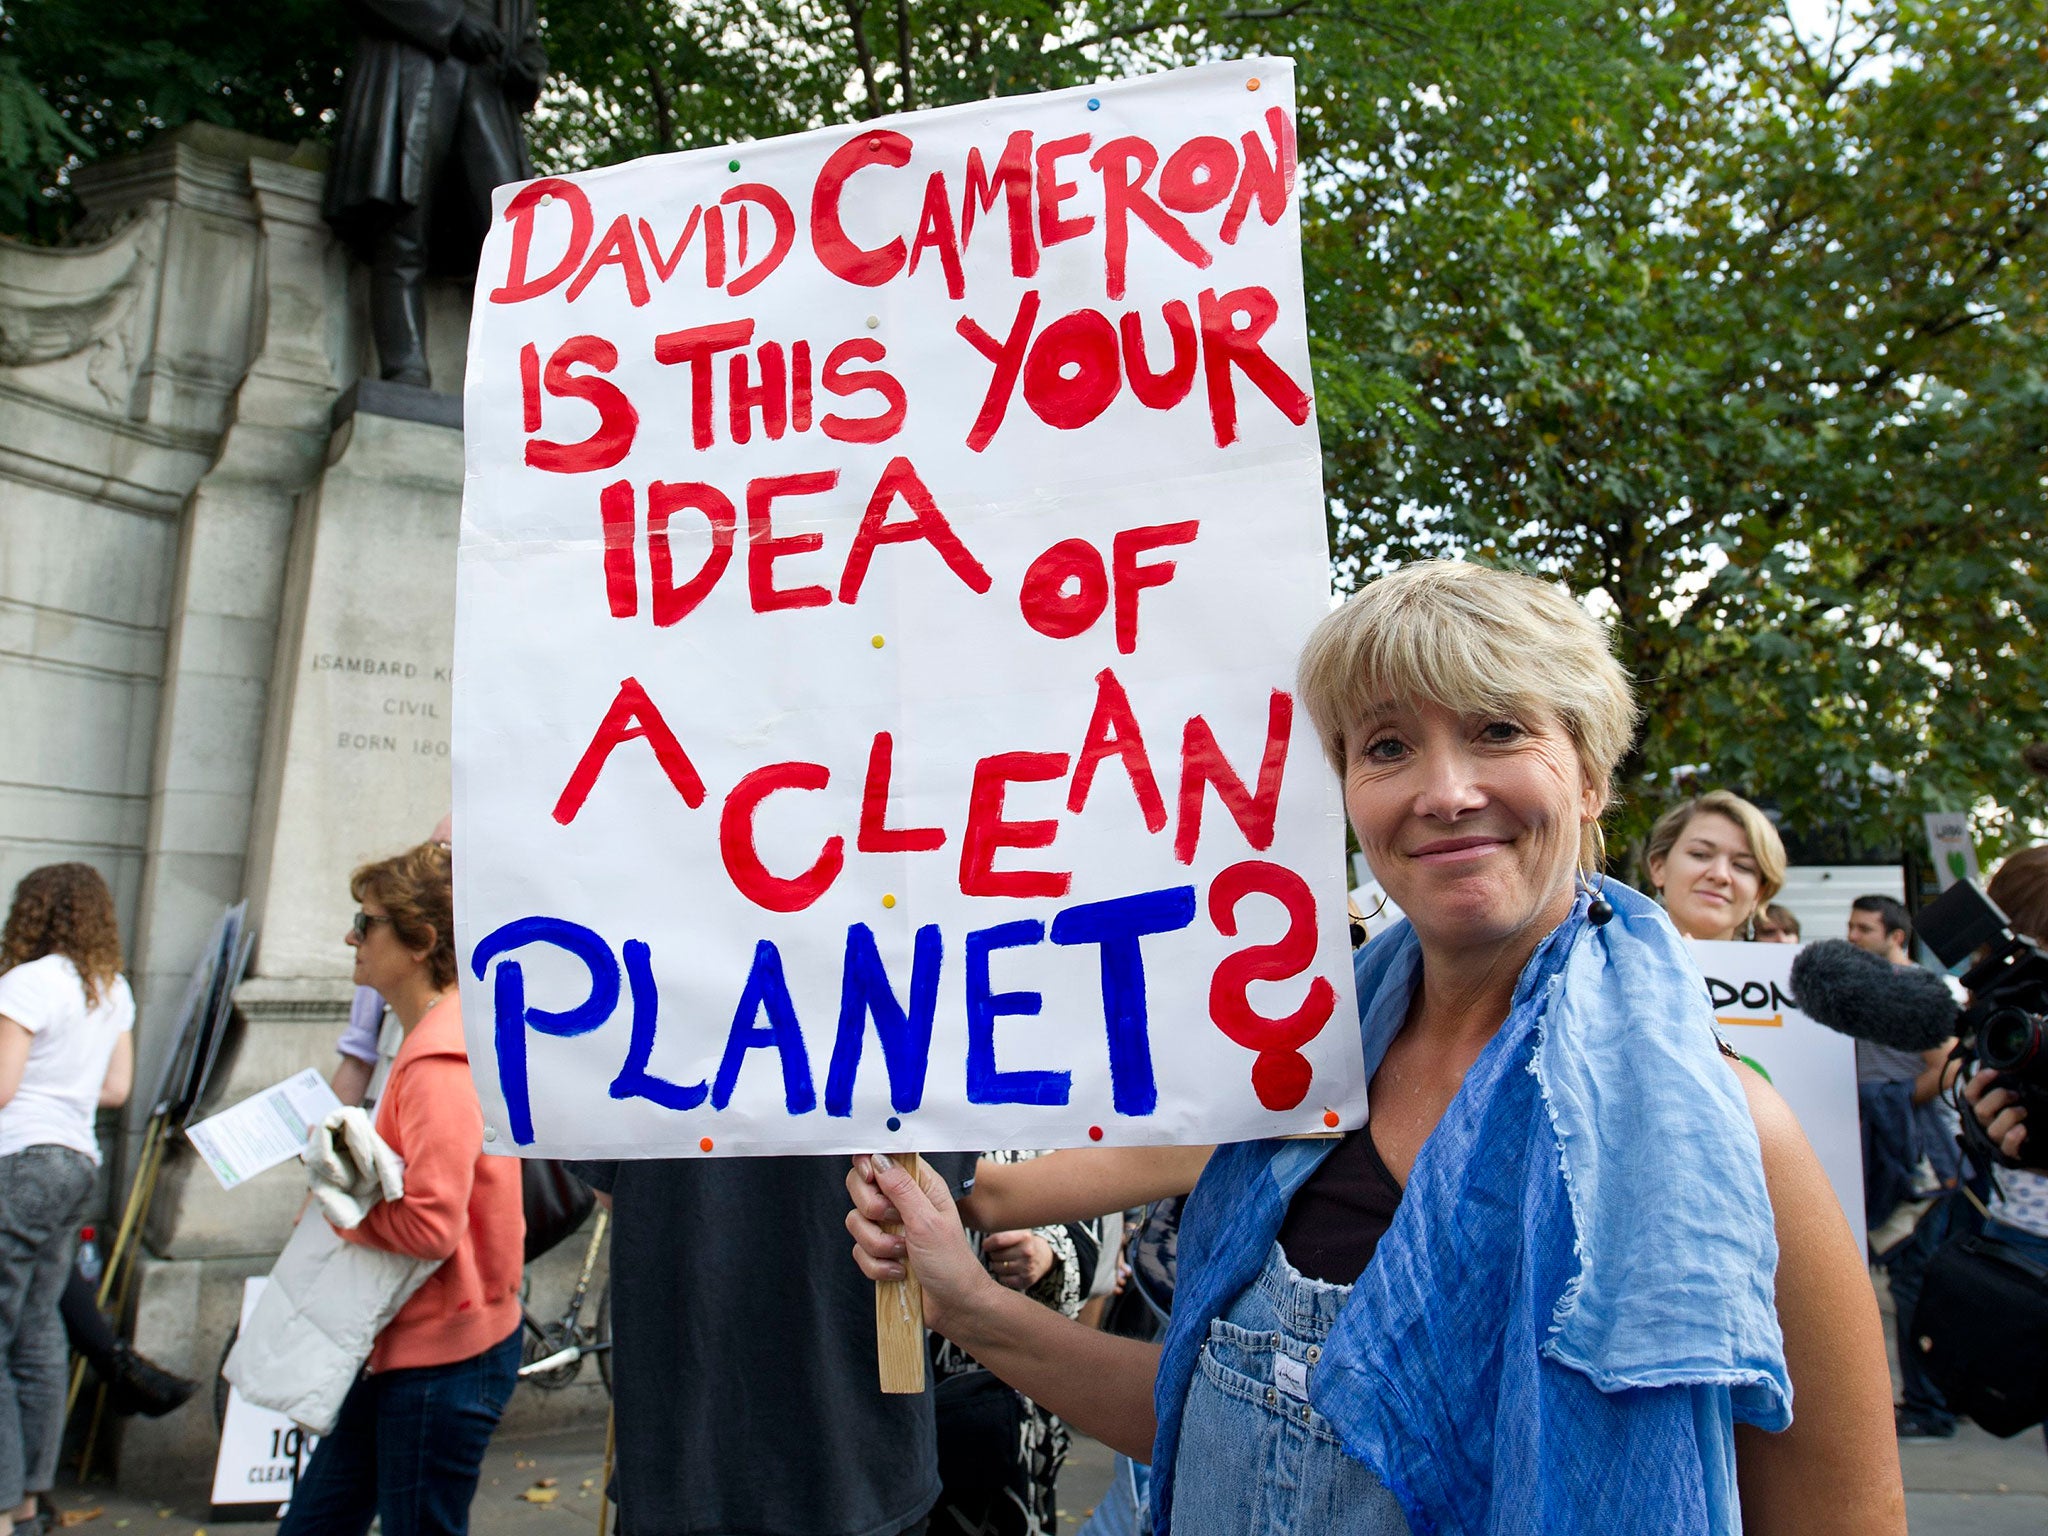 Around 40,000 people marched in London including Emma Thompson and many marches were arranged around the world to demand urgent action on climate change